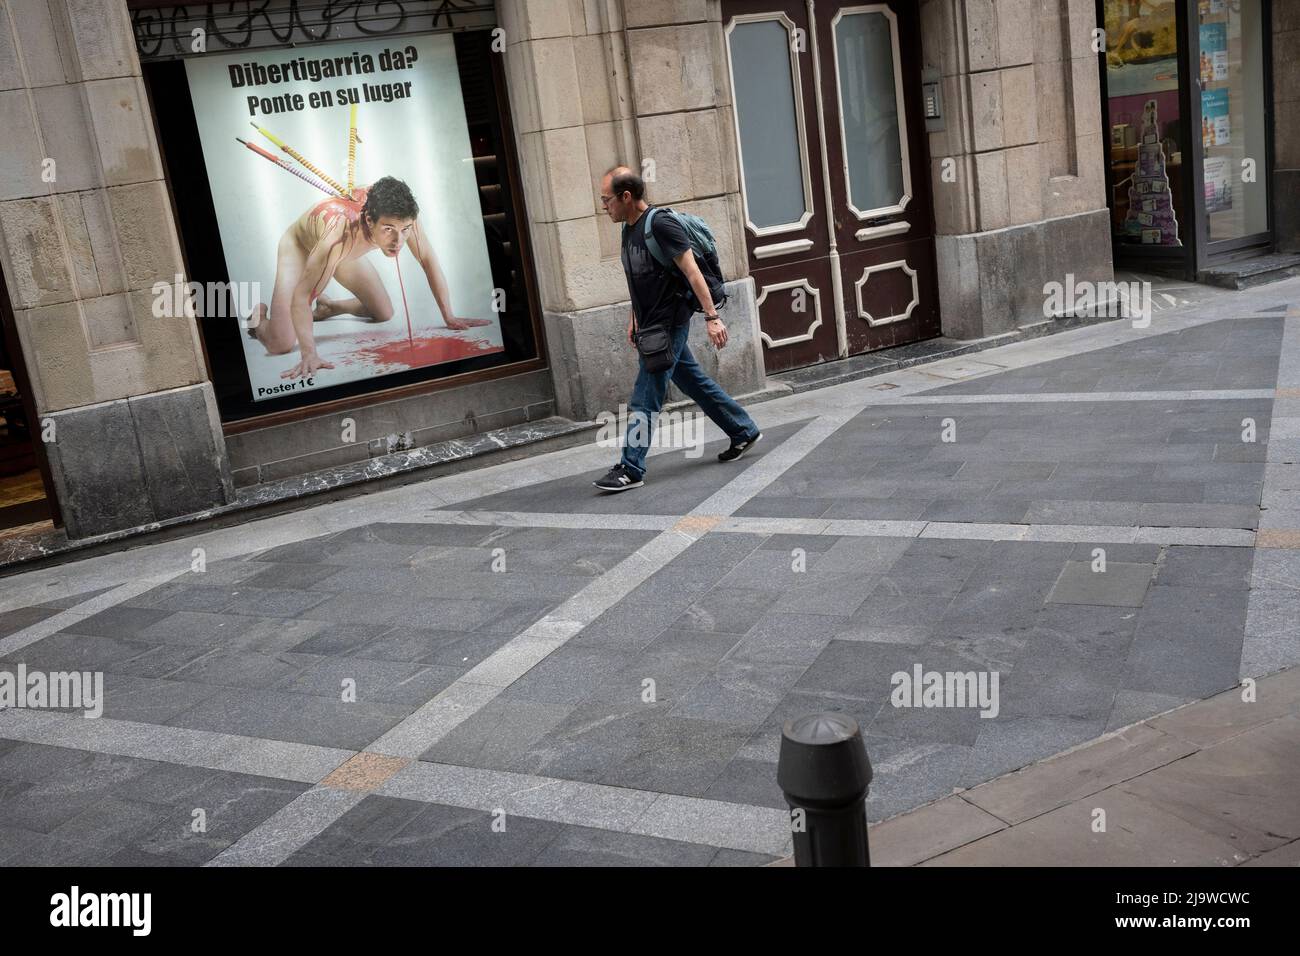 A man walks past a poster denouncing the bullfighting bloodsport in Bilbao's old town, on 20th May 2022, in Bilbao, Cantabria, Spain. Bullfighting has been banned in Catalonia since 2011, but in the rest of the country, the conversation has switched since the onset of the pandemic. Where once the debate focused on prohibition, the question now is whether a lifeline ought to be granted to this ailing cultural industry. The current left-wing coalition government appears not to have the political will to explicitly prohibit what was once known as the “national fiesta”, or, conversely, to provide Stock Photo